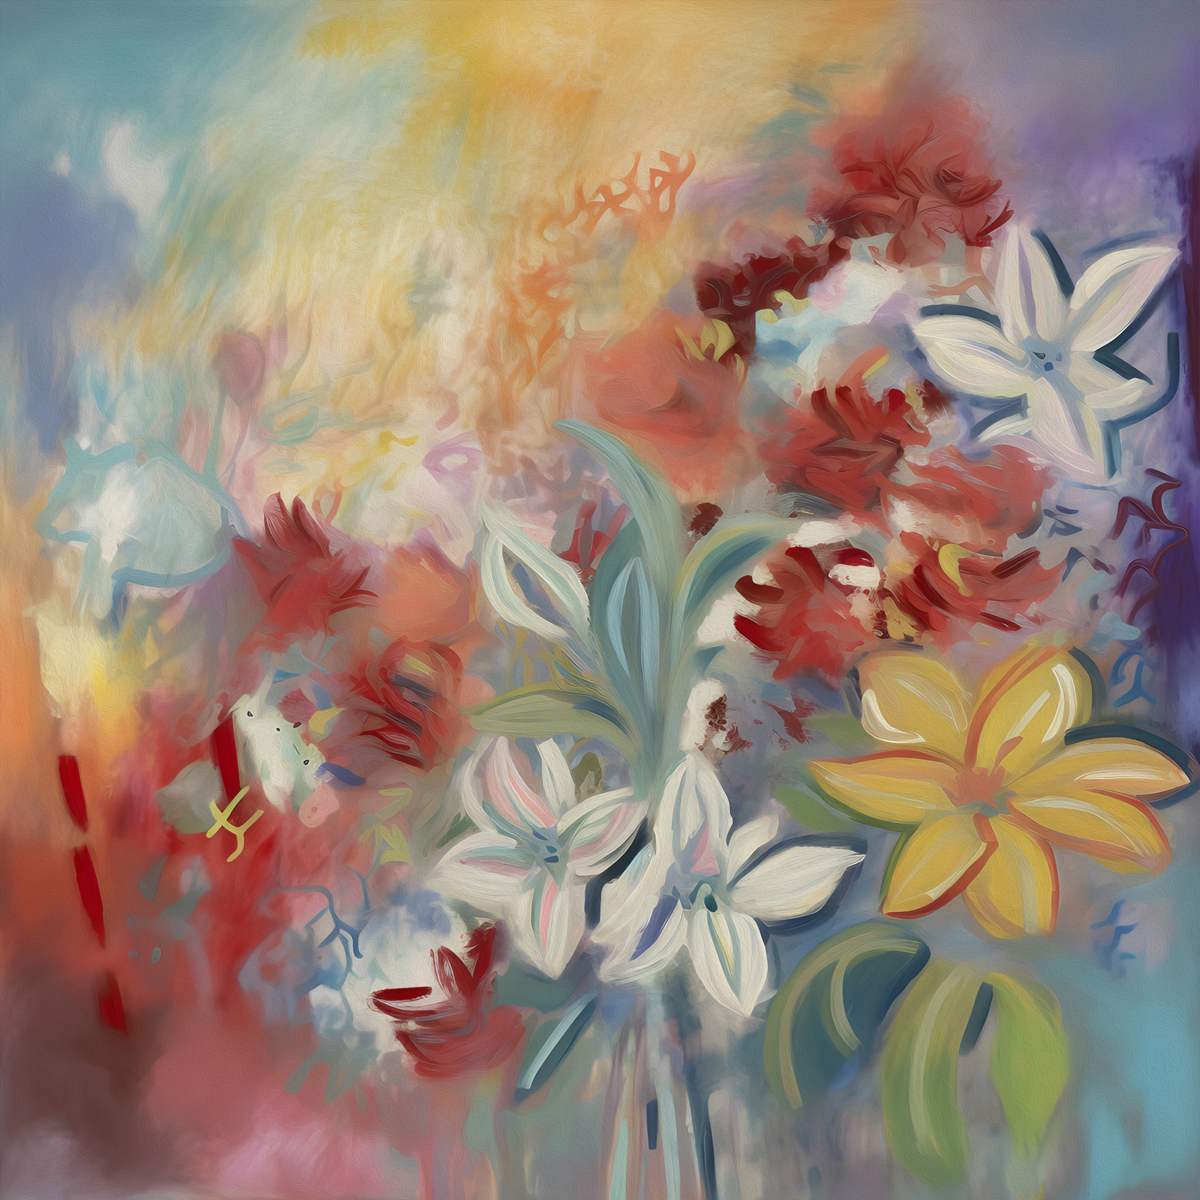  Radiant Summer: 'Summer Blooms' Collection - Art Print on Canvas. Artemyst